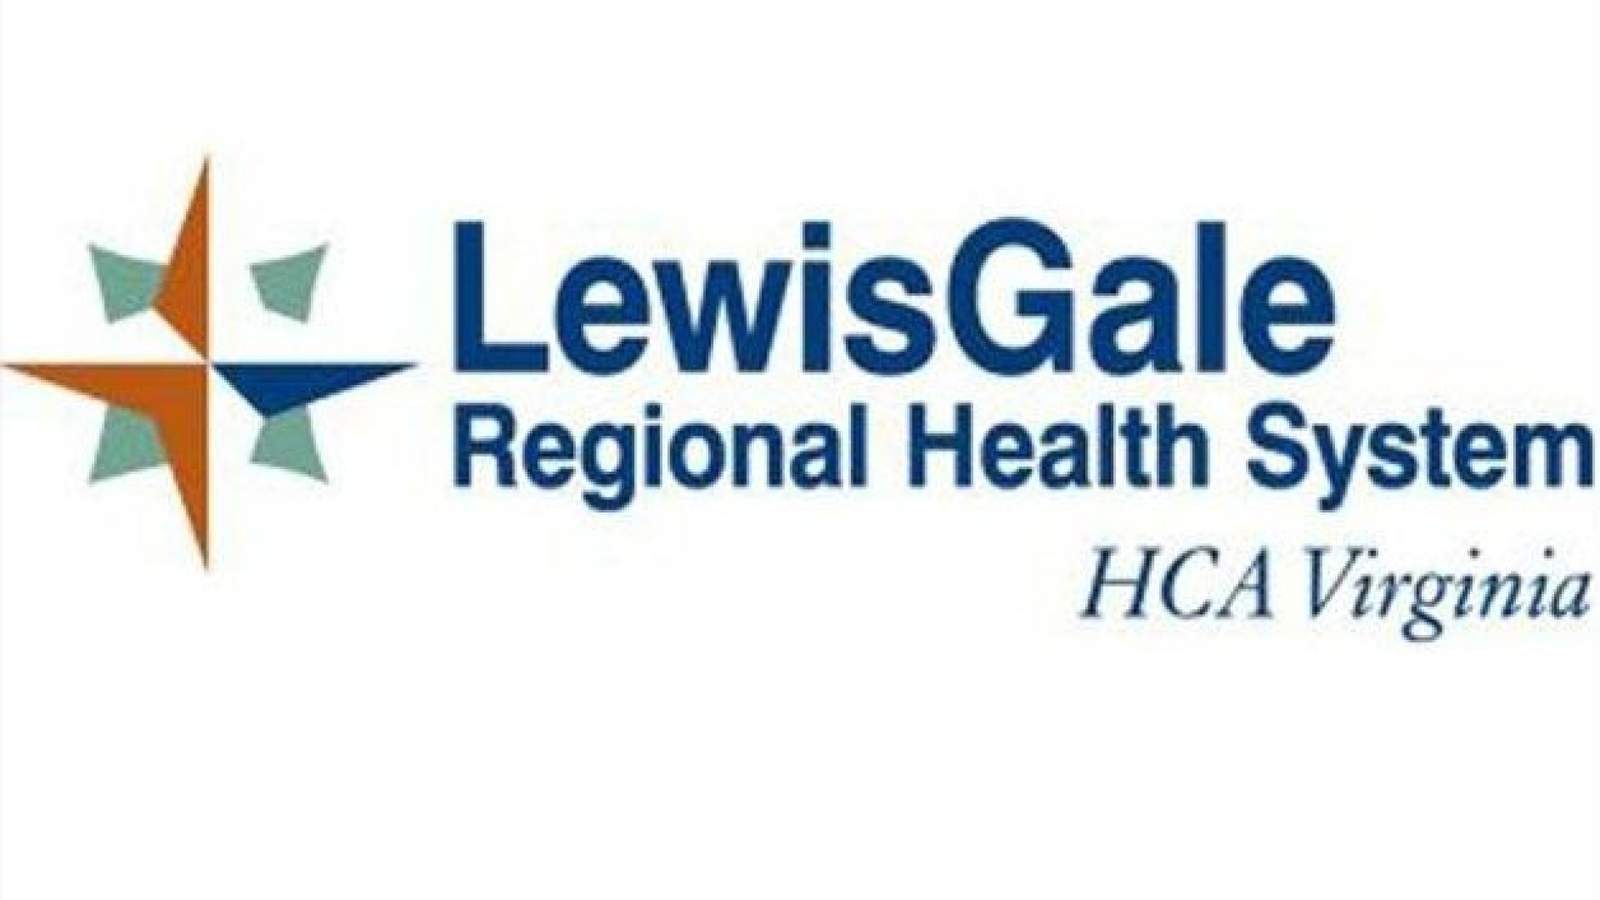 LewisGale Hospital Alleghany temporarily suspending ICU services